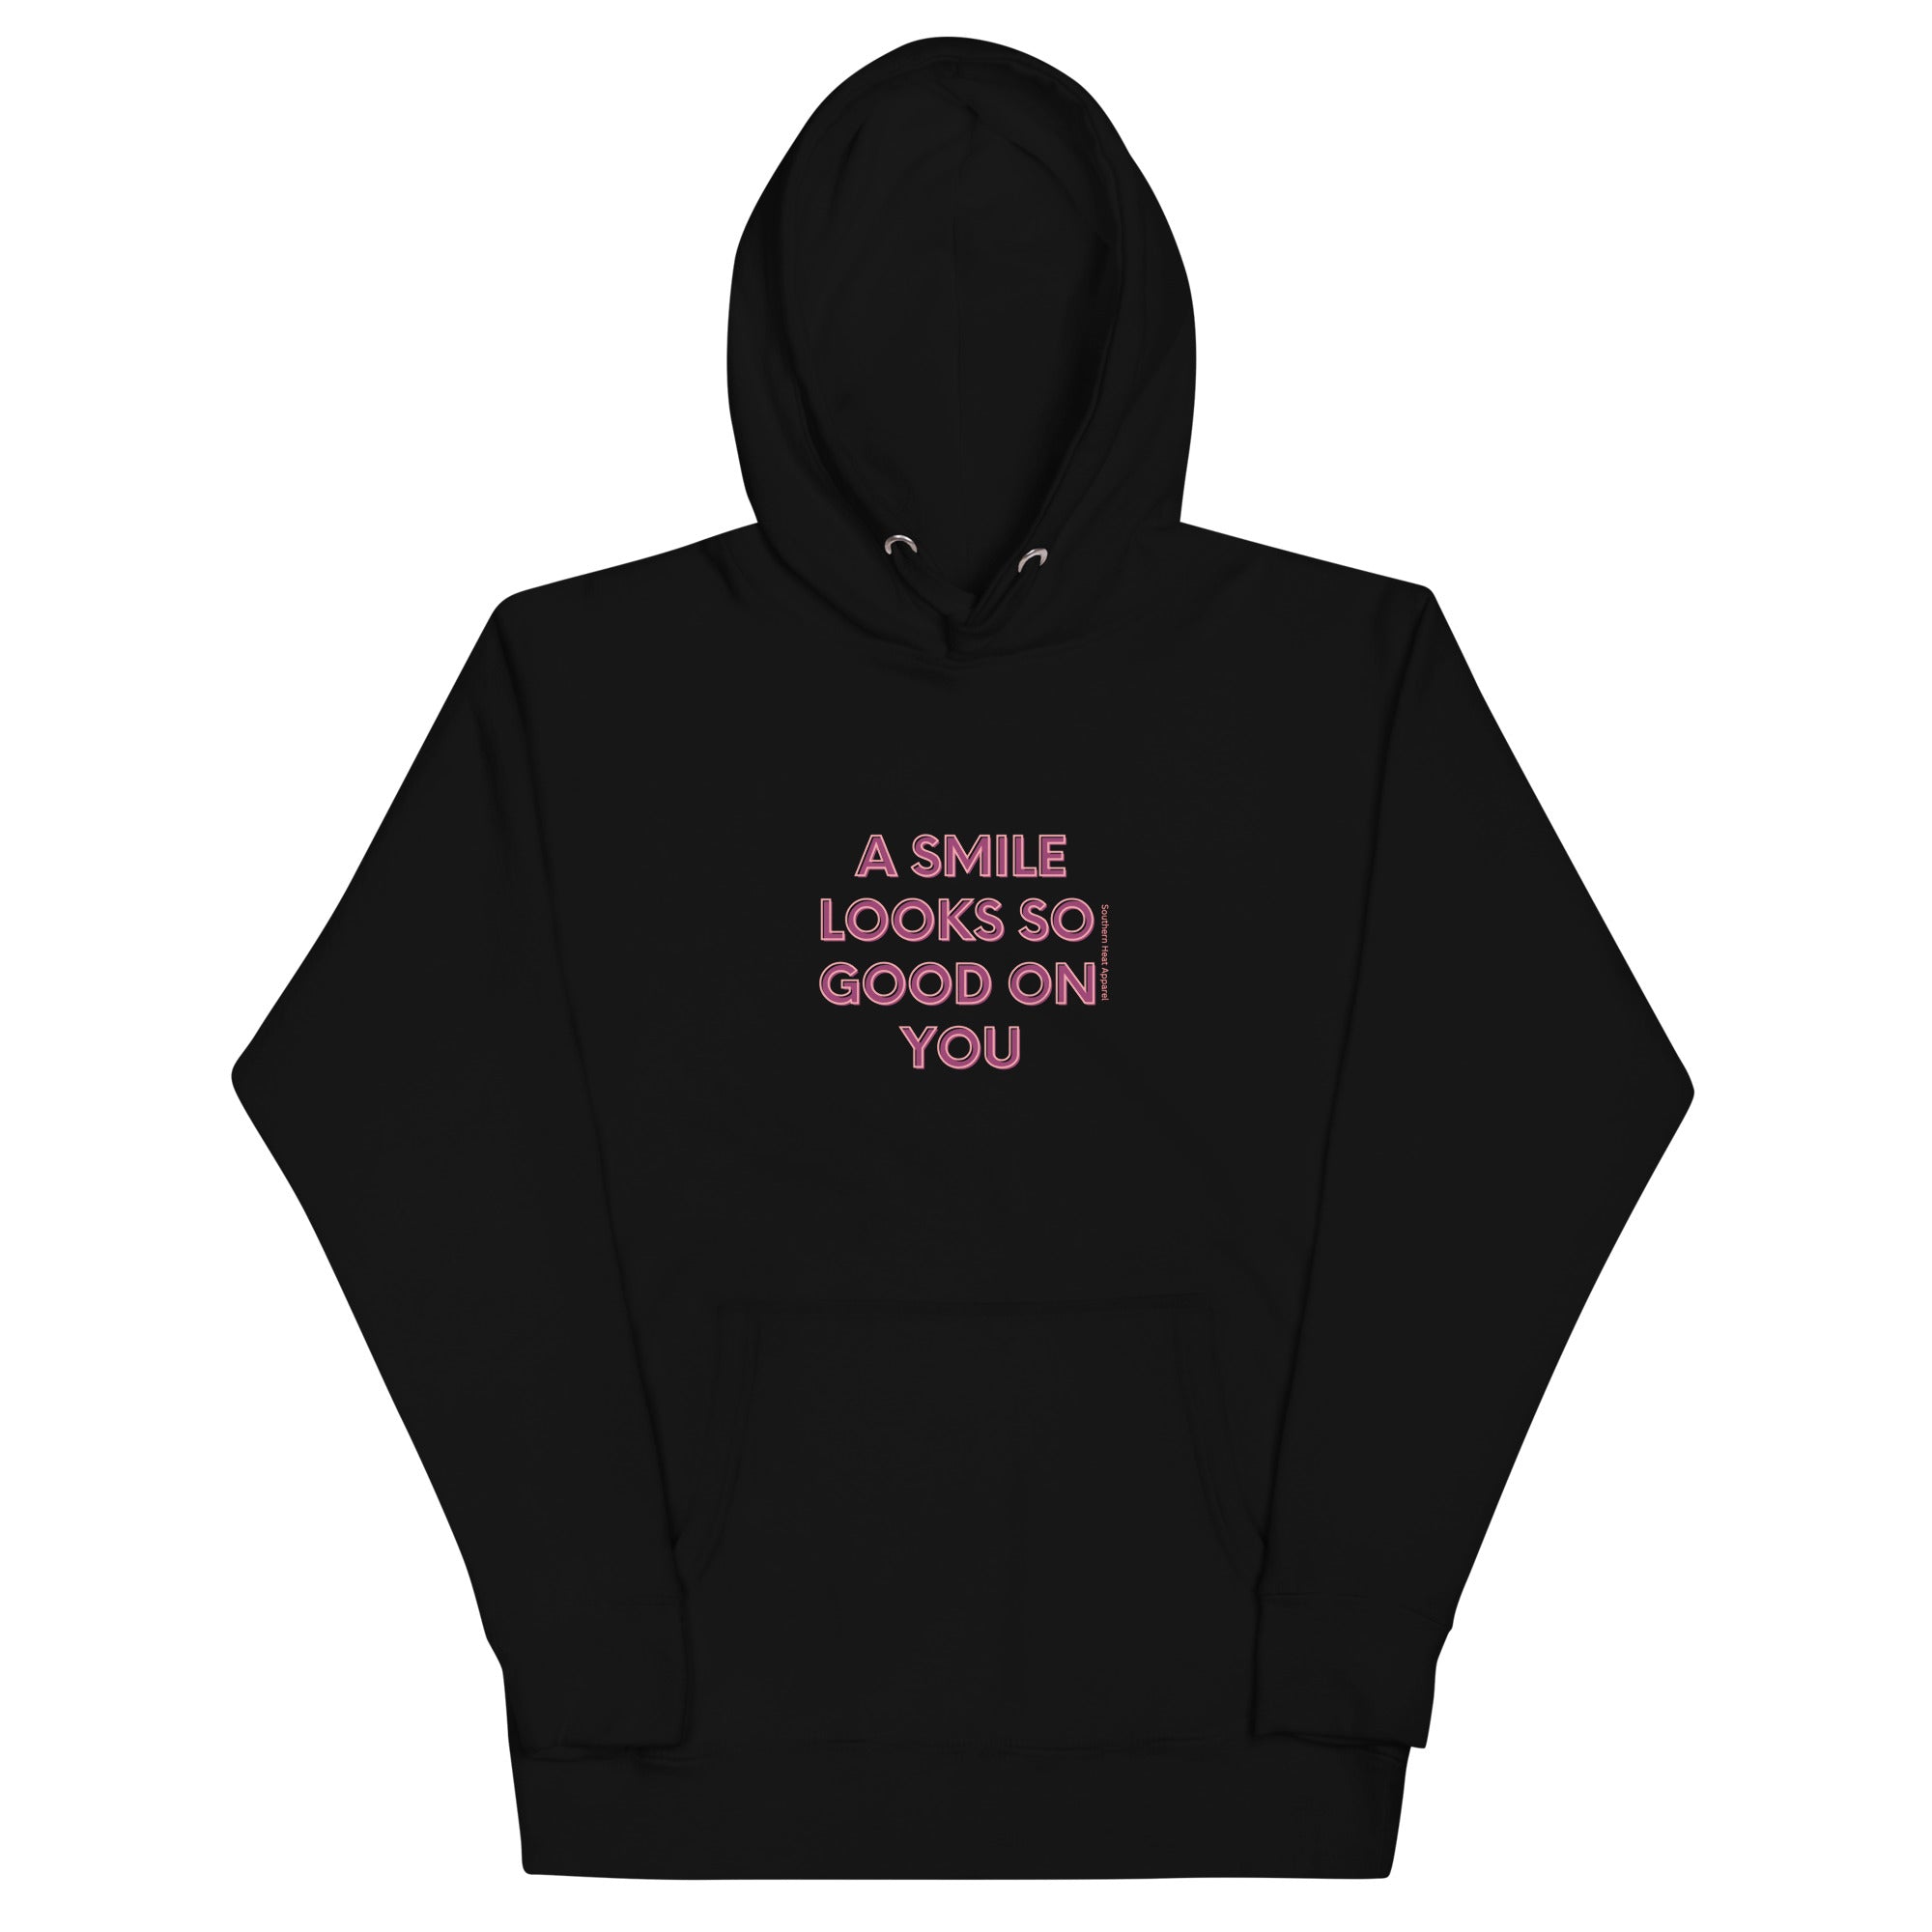 A smile looks so good on you-Unisex Hoodie